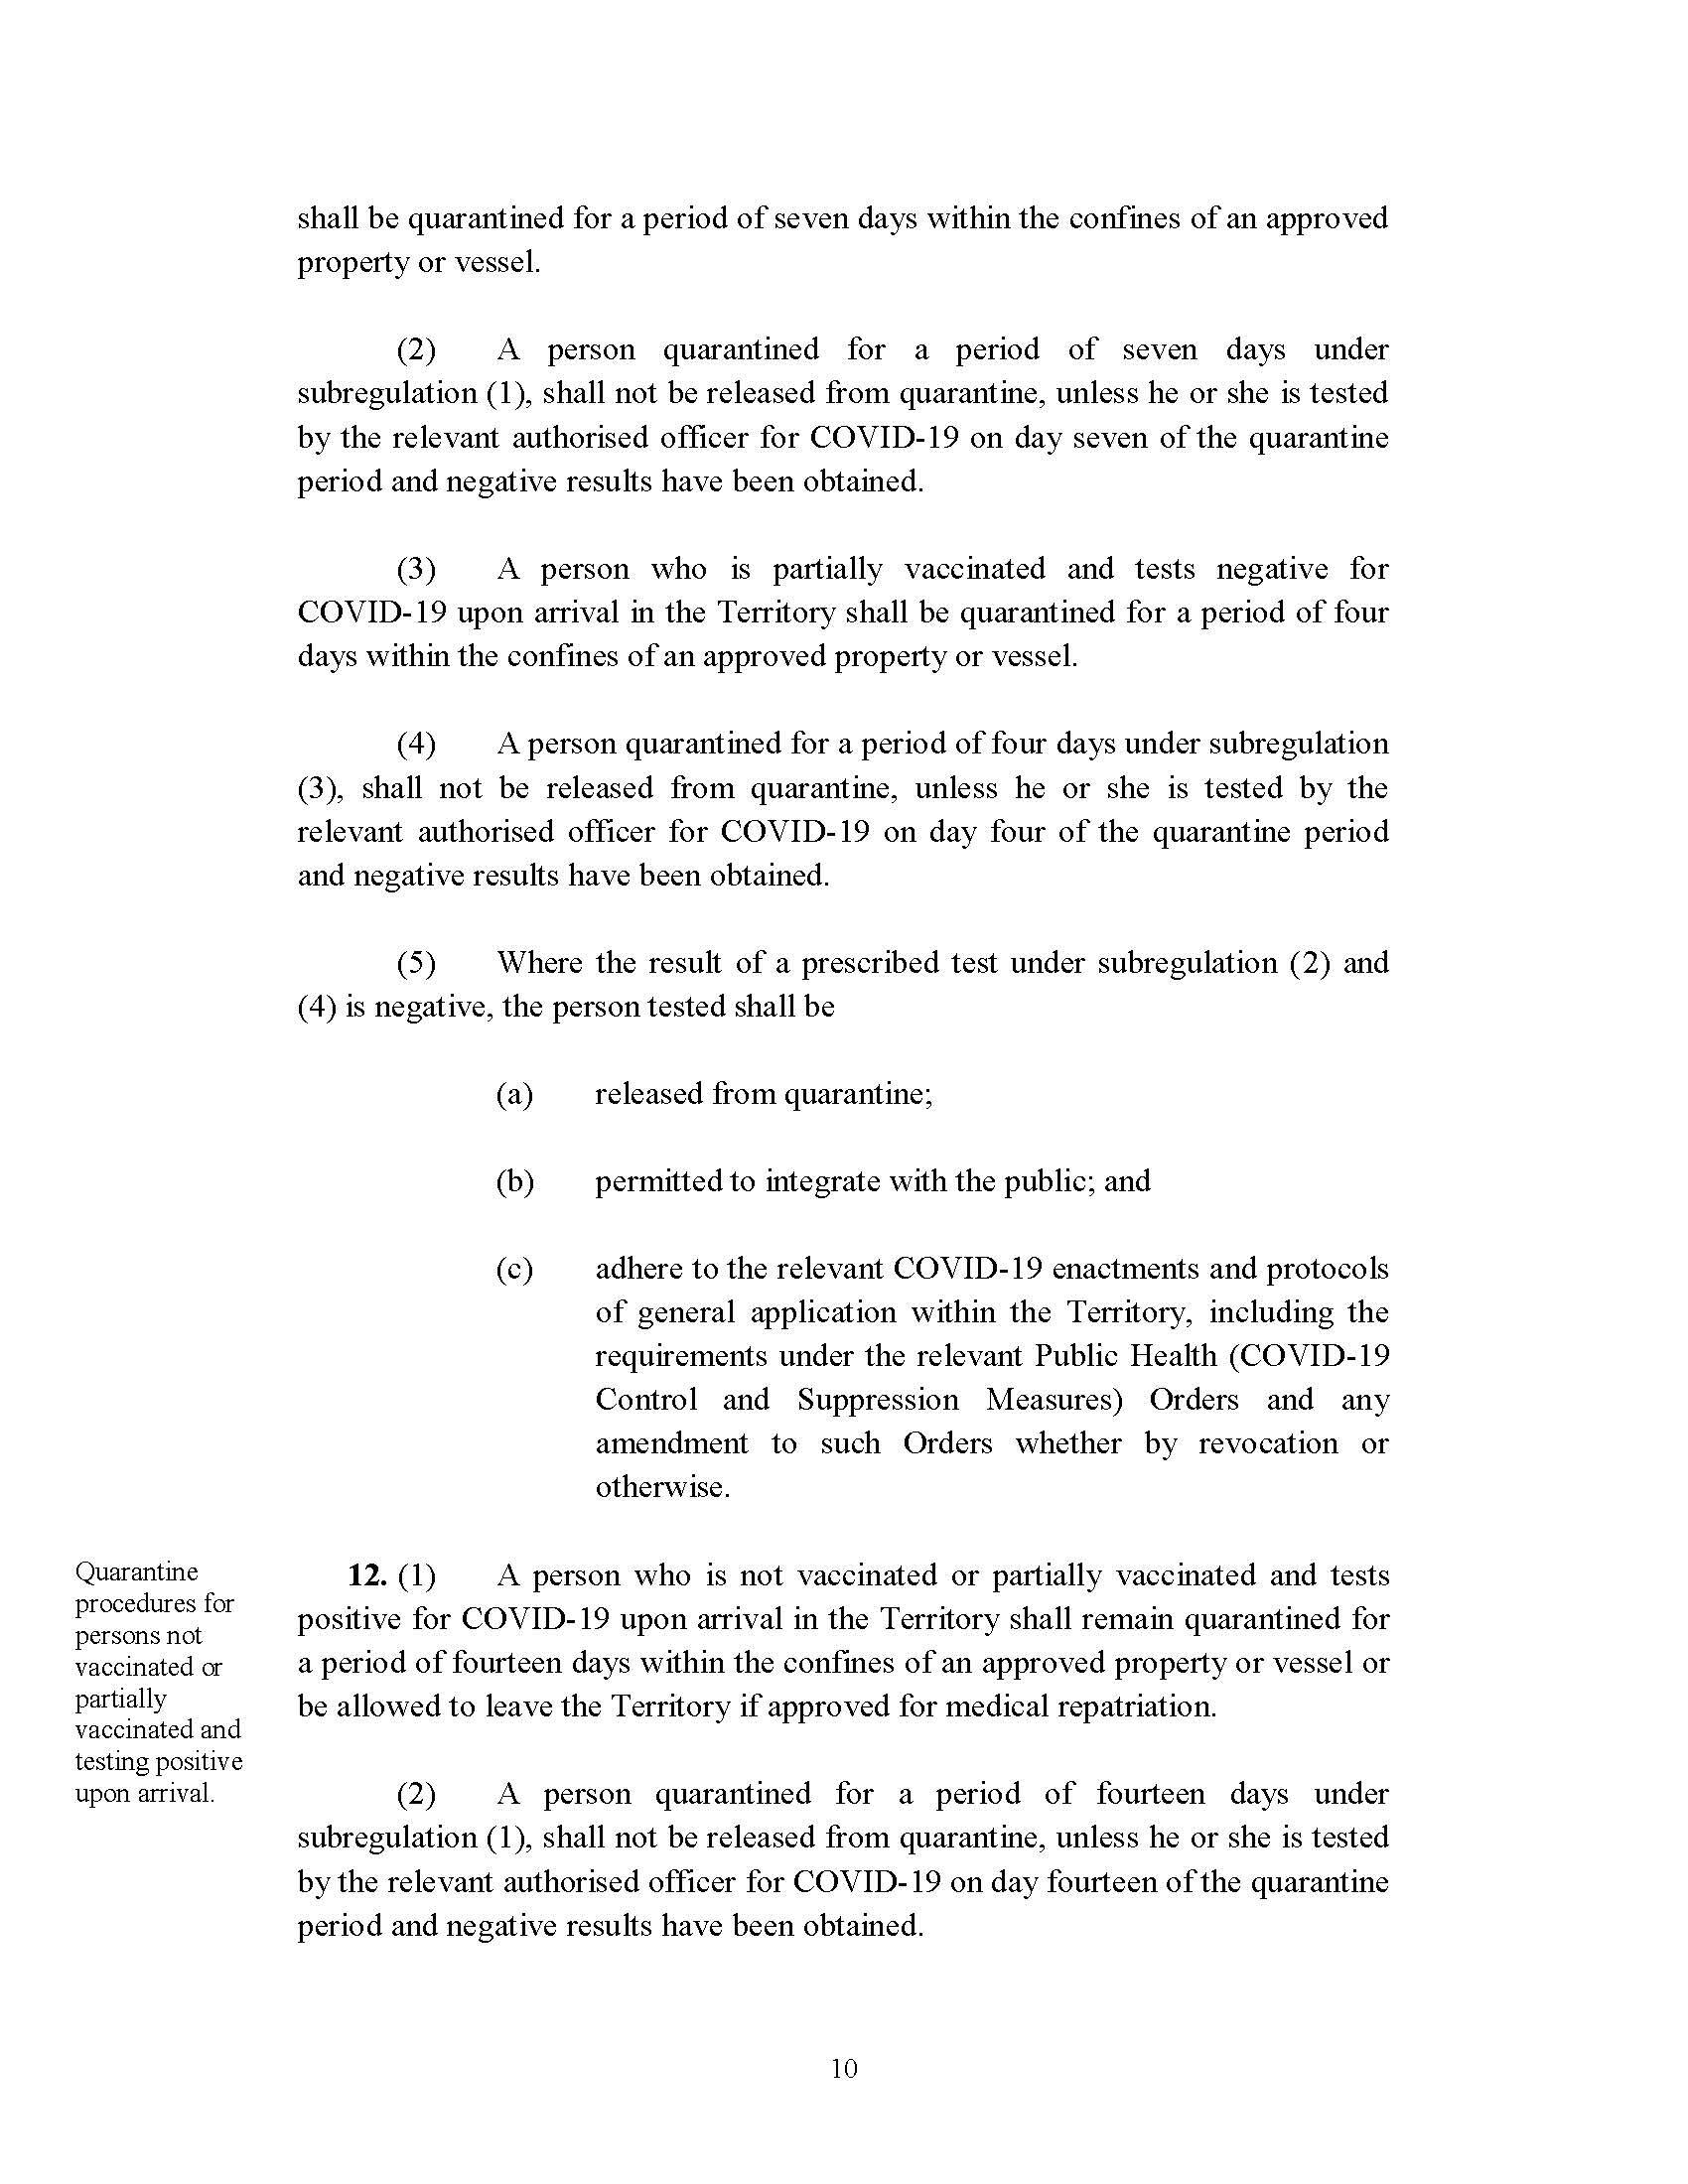 Attached picture SI No 55 of 2021 -- COVID-19 Control and Suppression (Entry of Persons) (No. 3) Regulations, 2021_Page_10.jpg